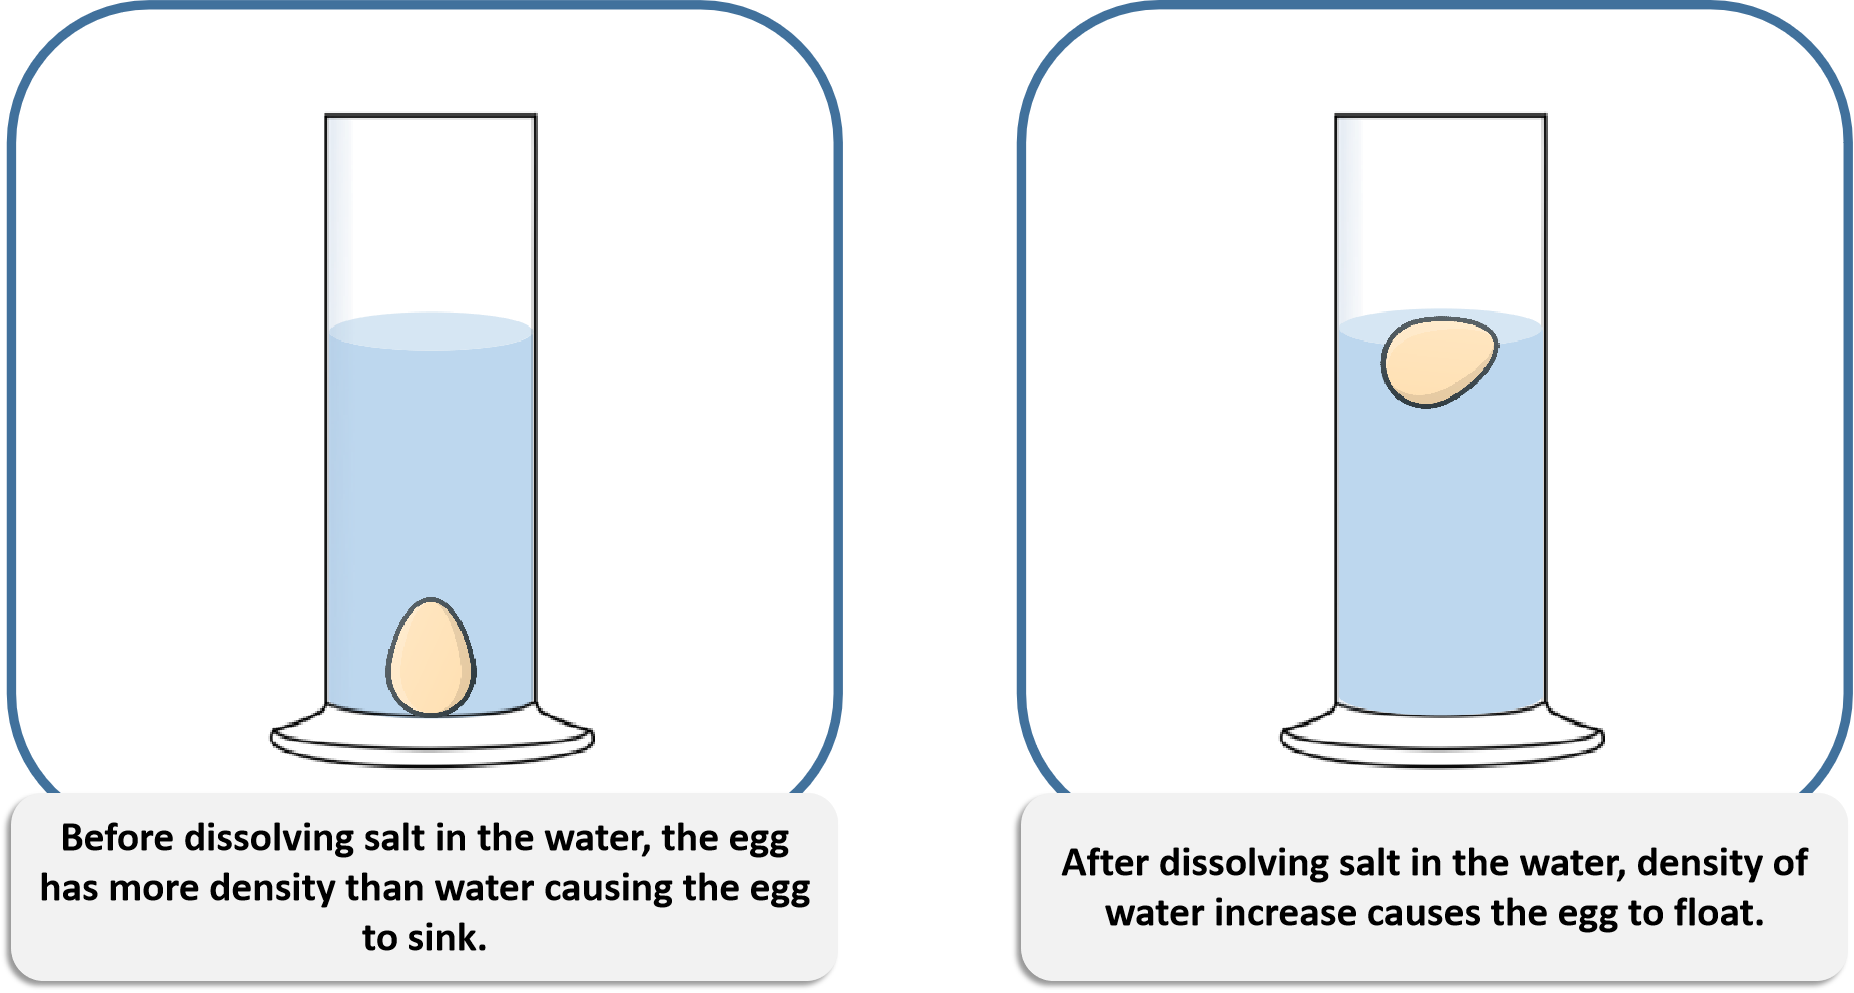 what density floats in water